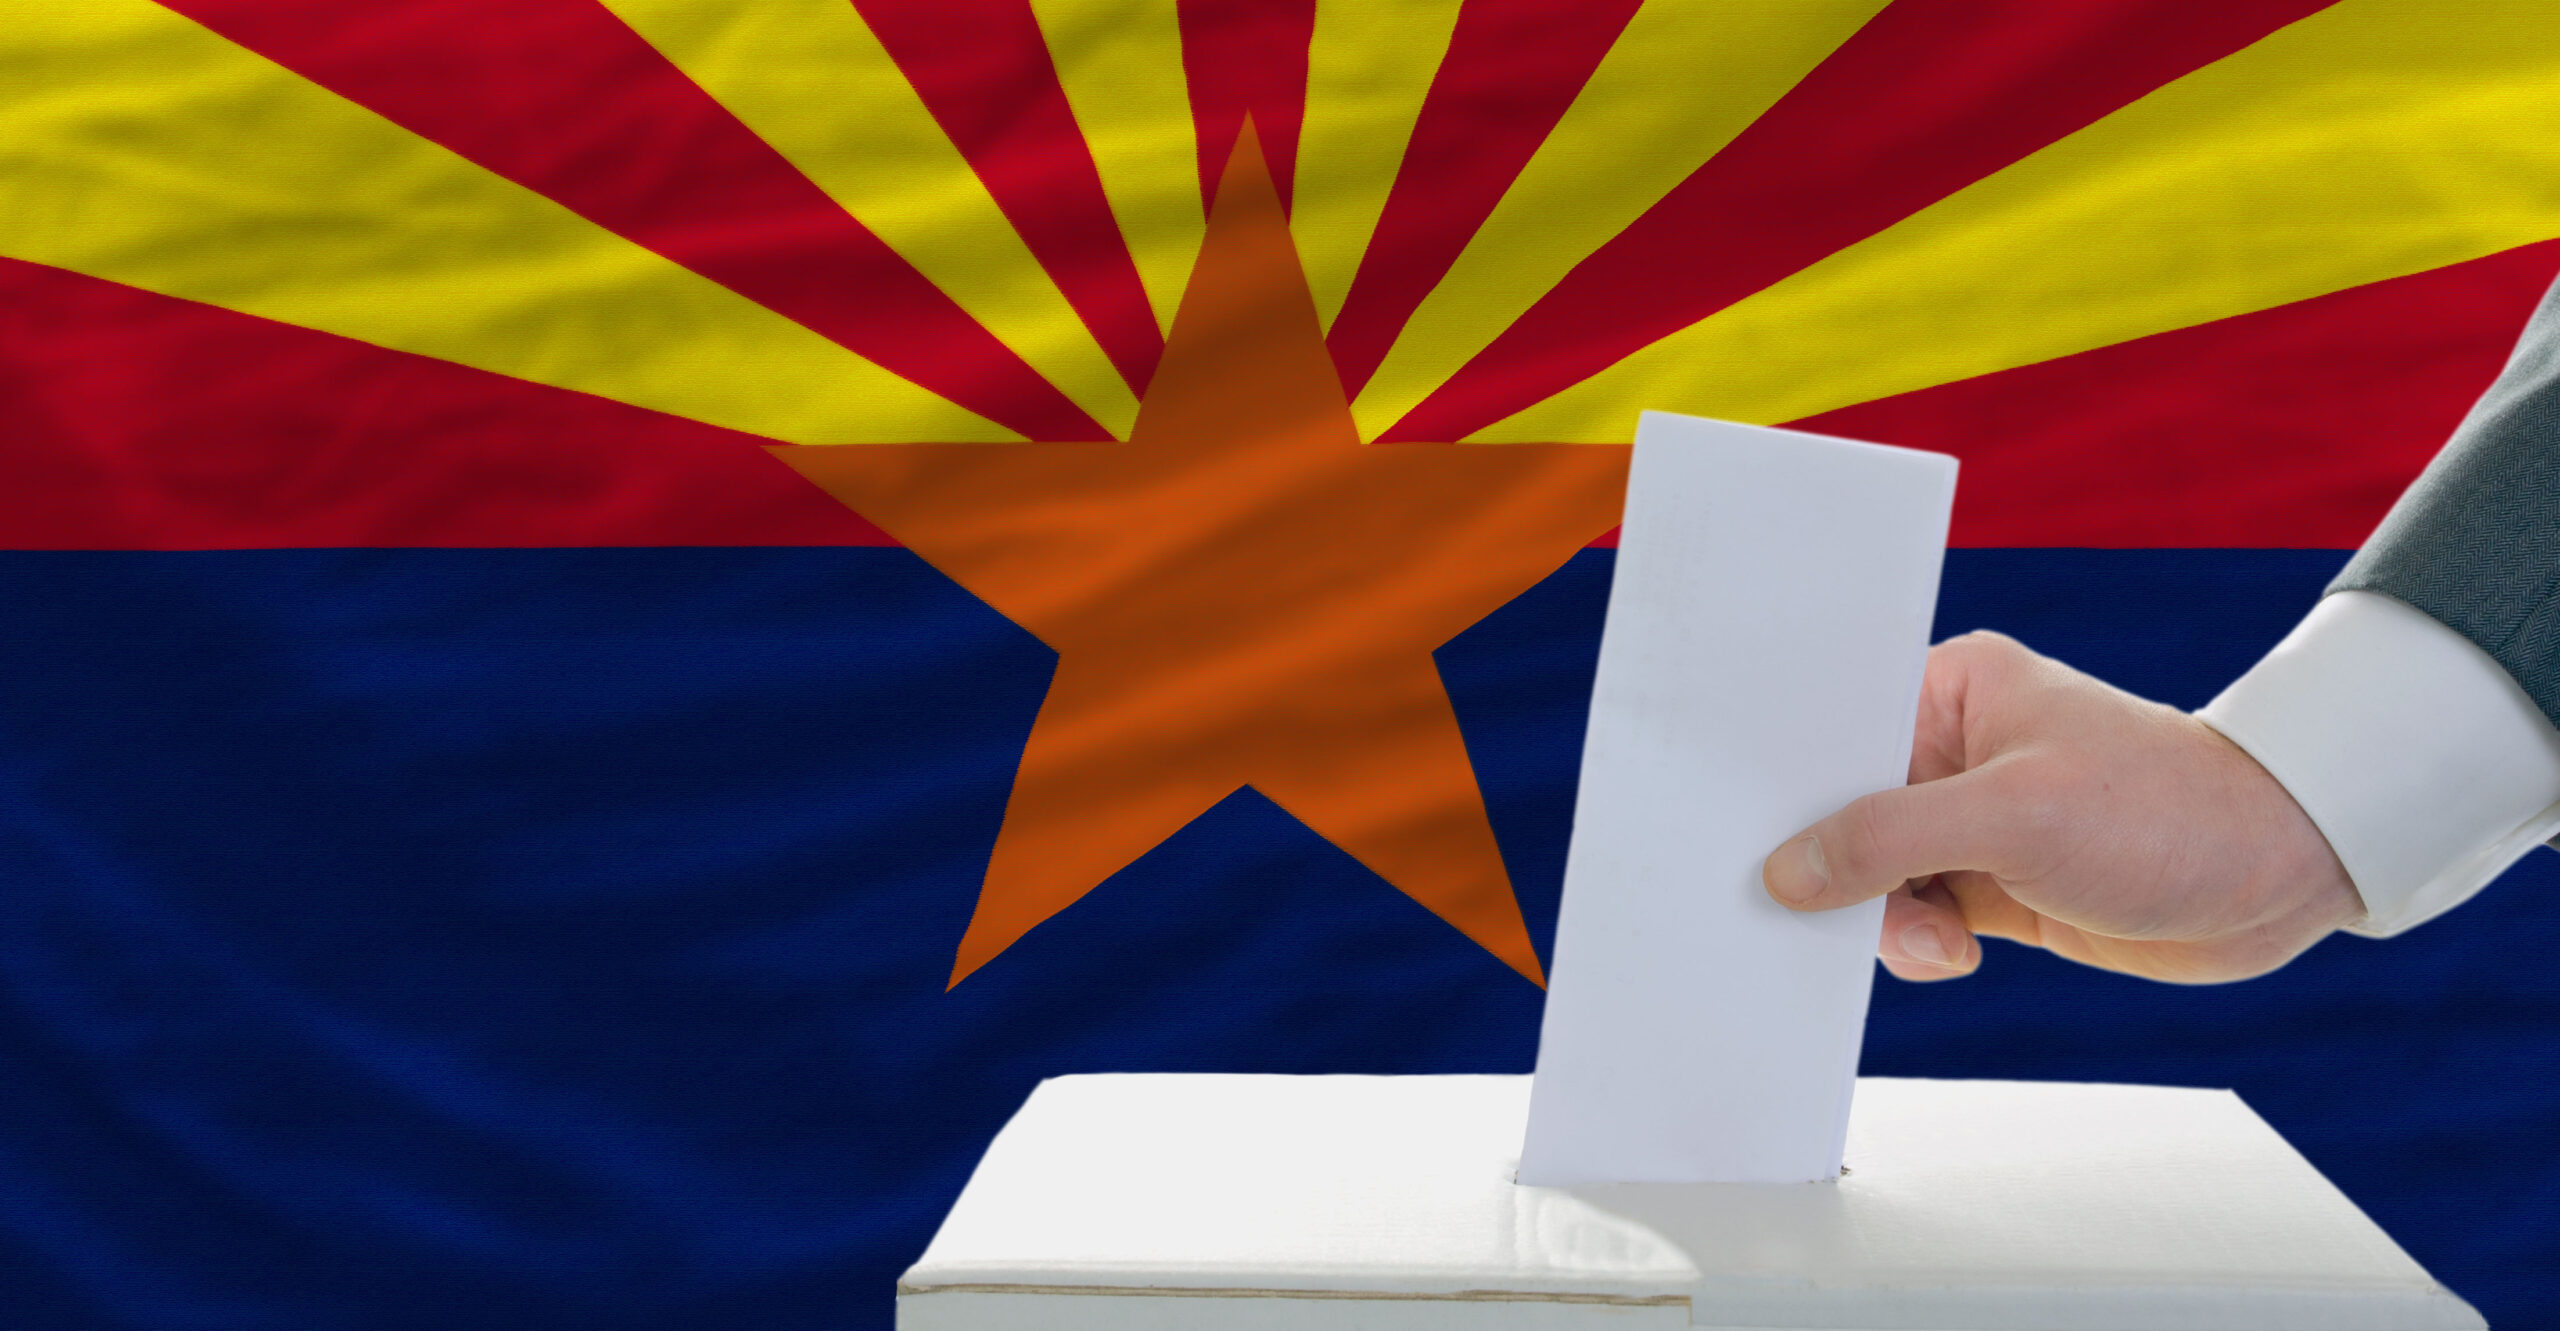 Registration Drives Boost Noncitizen Voting in Arizona, Research Finds